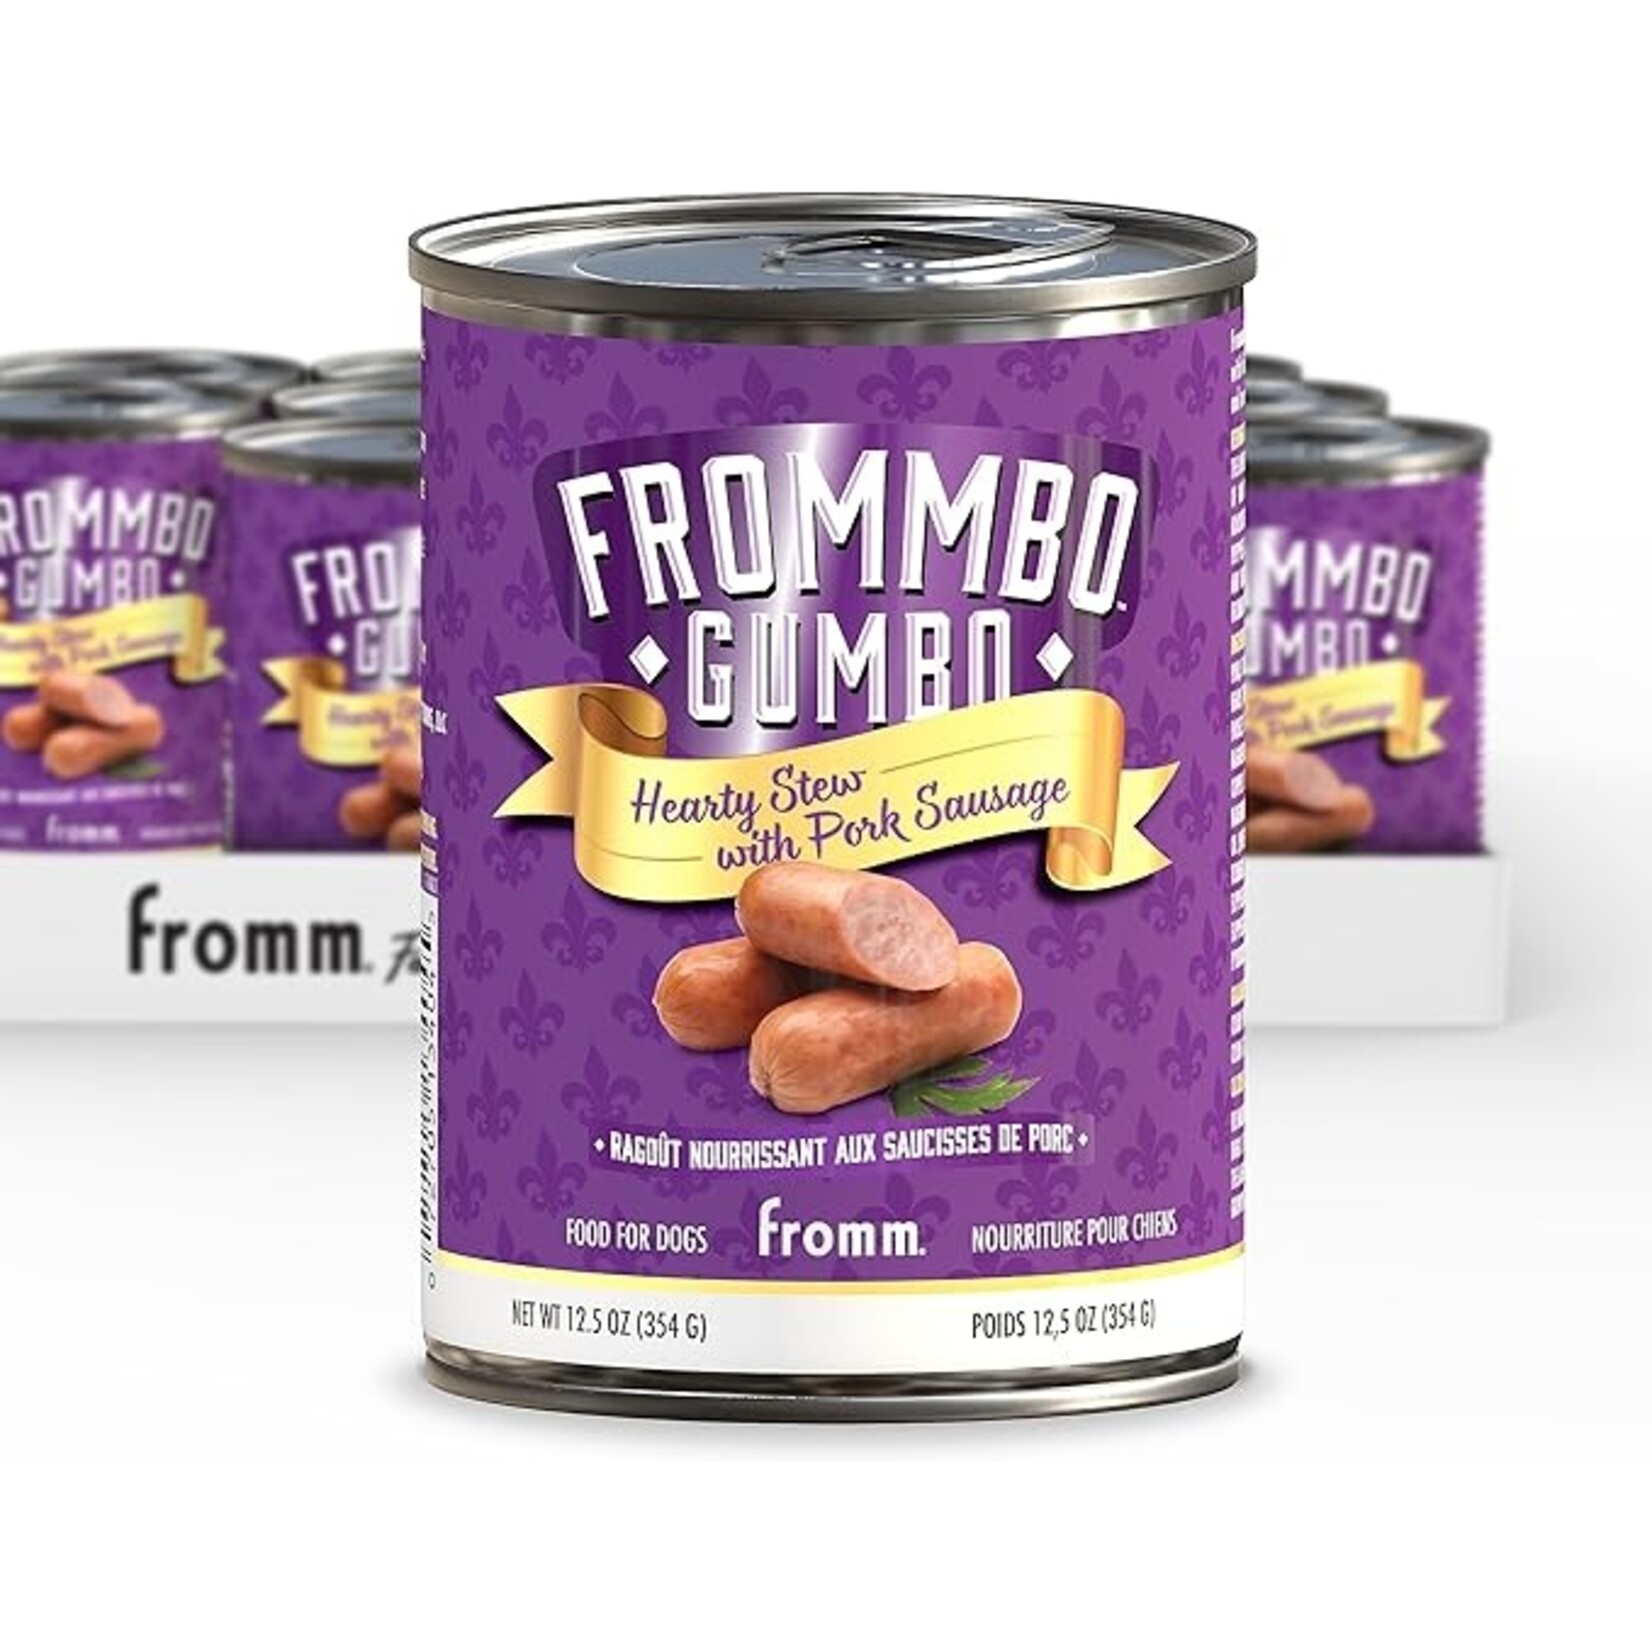 Fromm Frommbo Gumbo Pork Sausage Hearty Stew 12.5oz